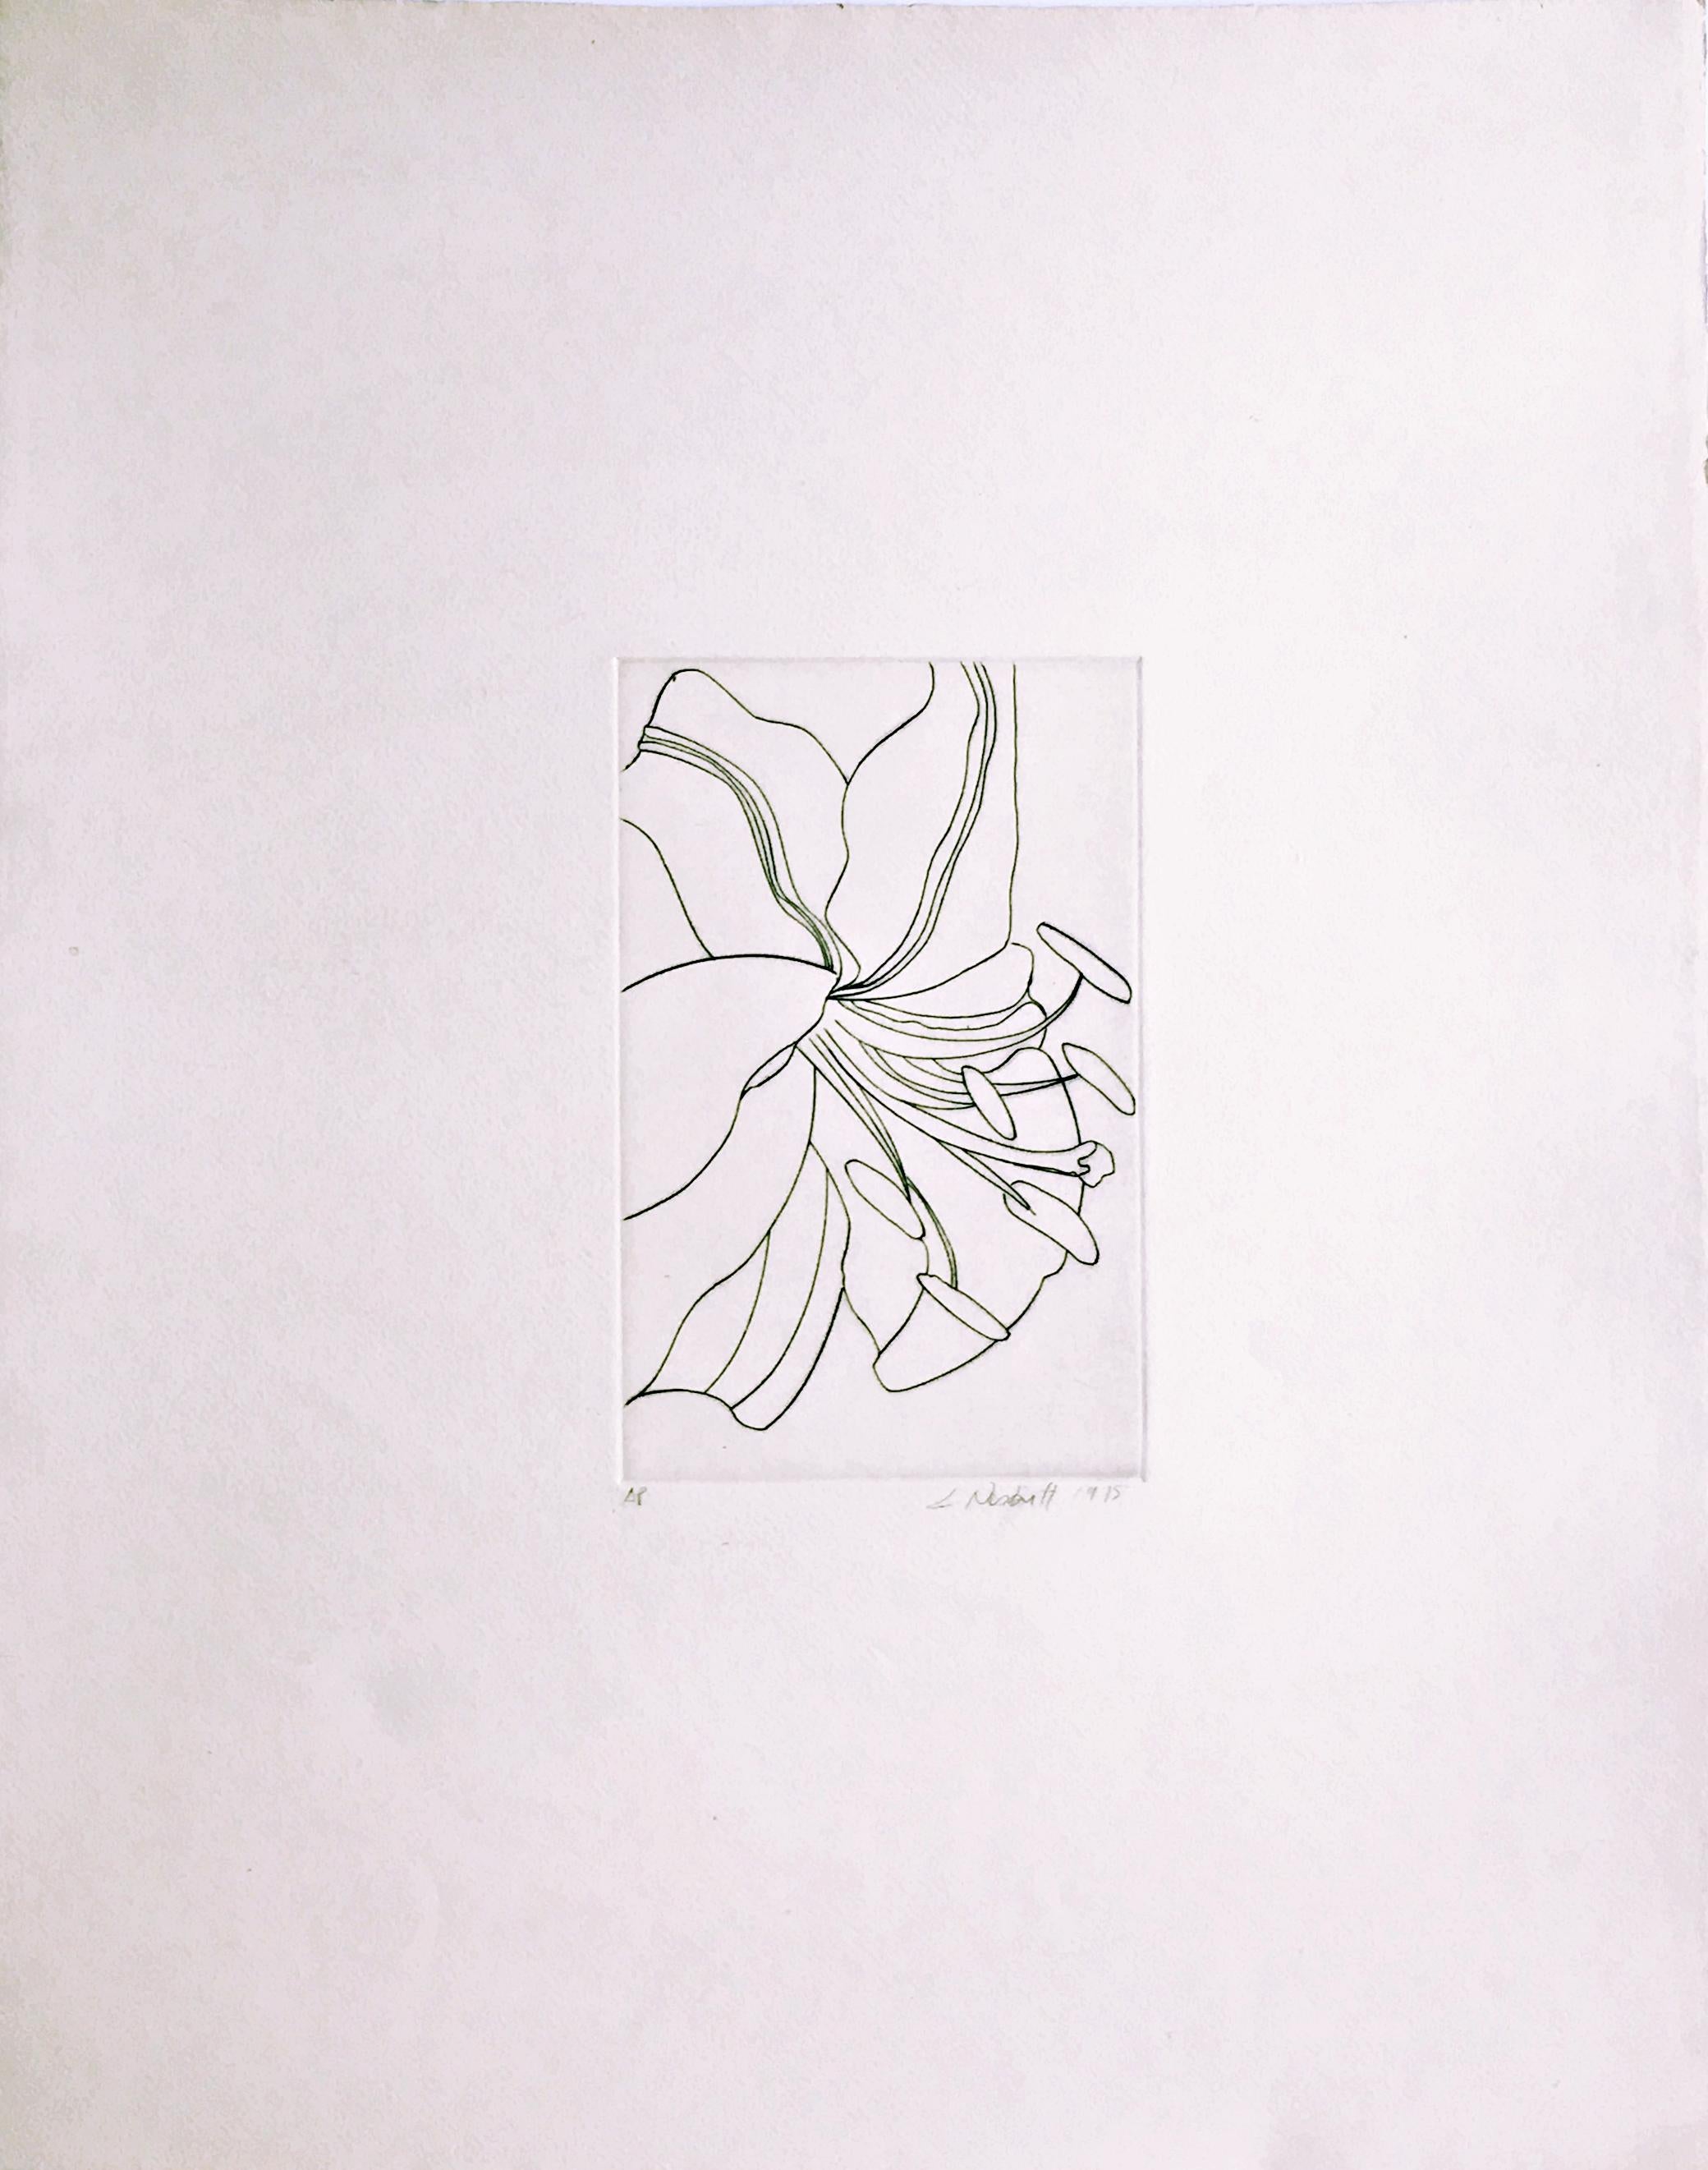 Lowell Nesbitt
Untitled Flower, 1975
Etching on wove paper
Hand signed, numbered AP and dated on the front
24 × 19 inches
Unframed
Poignant and exquisitely rendered etching of a flower by Lowell Nesbitt would make a lovely gift. Hand signed, dated